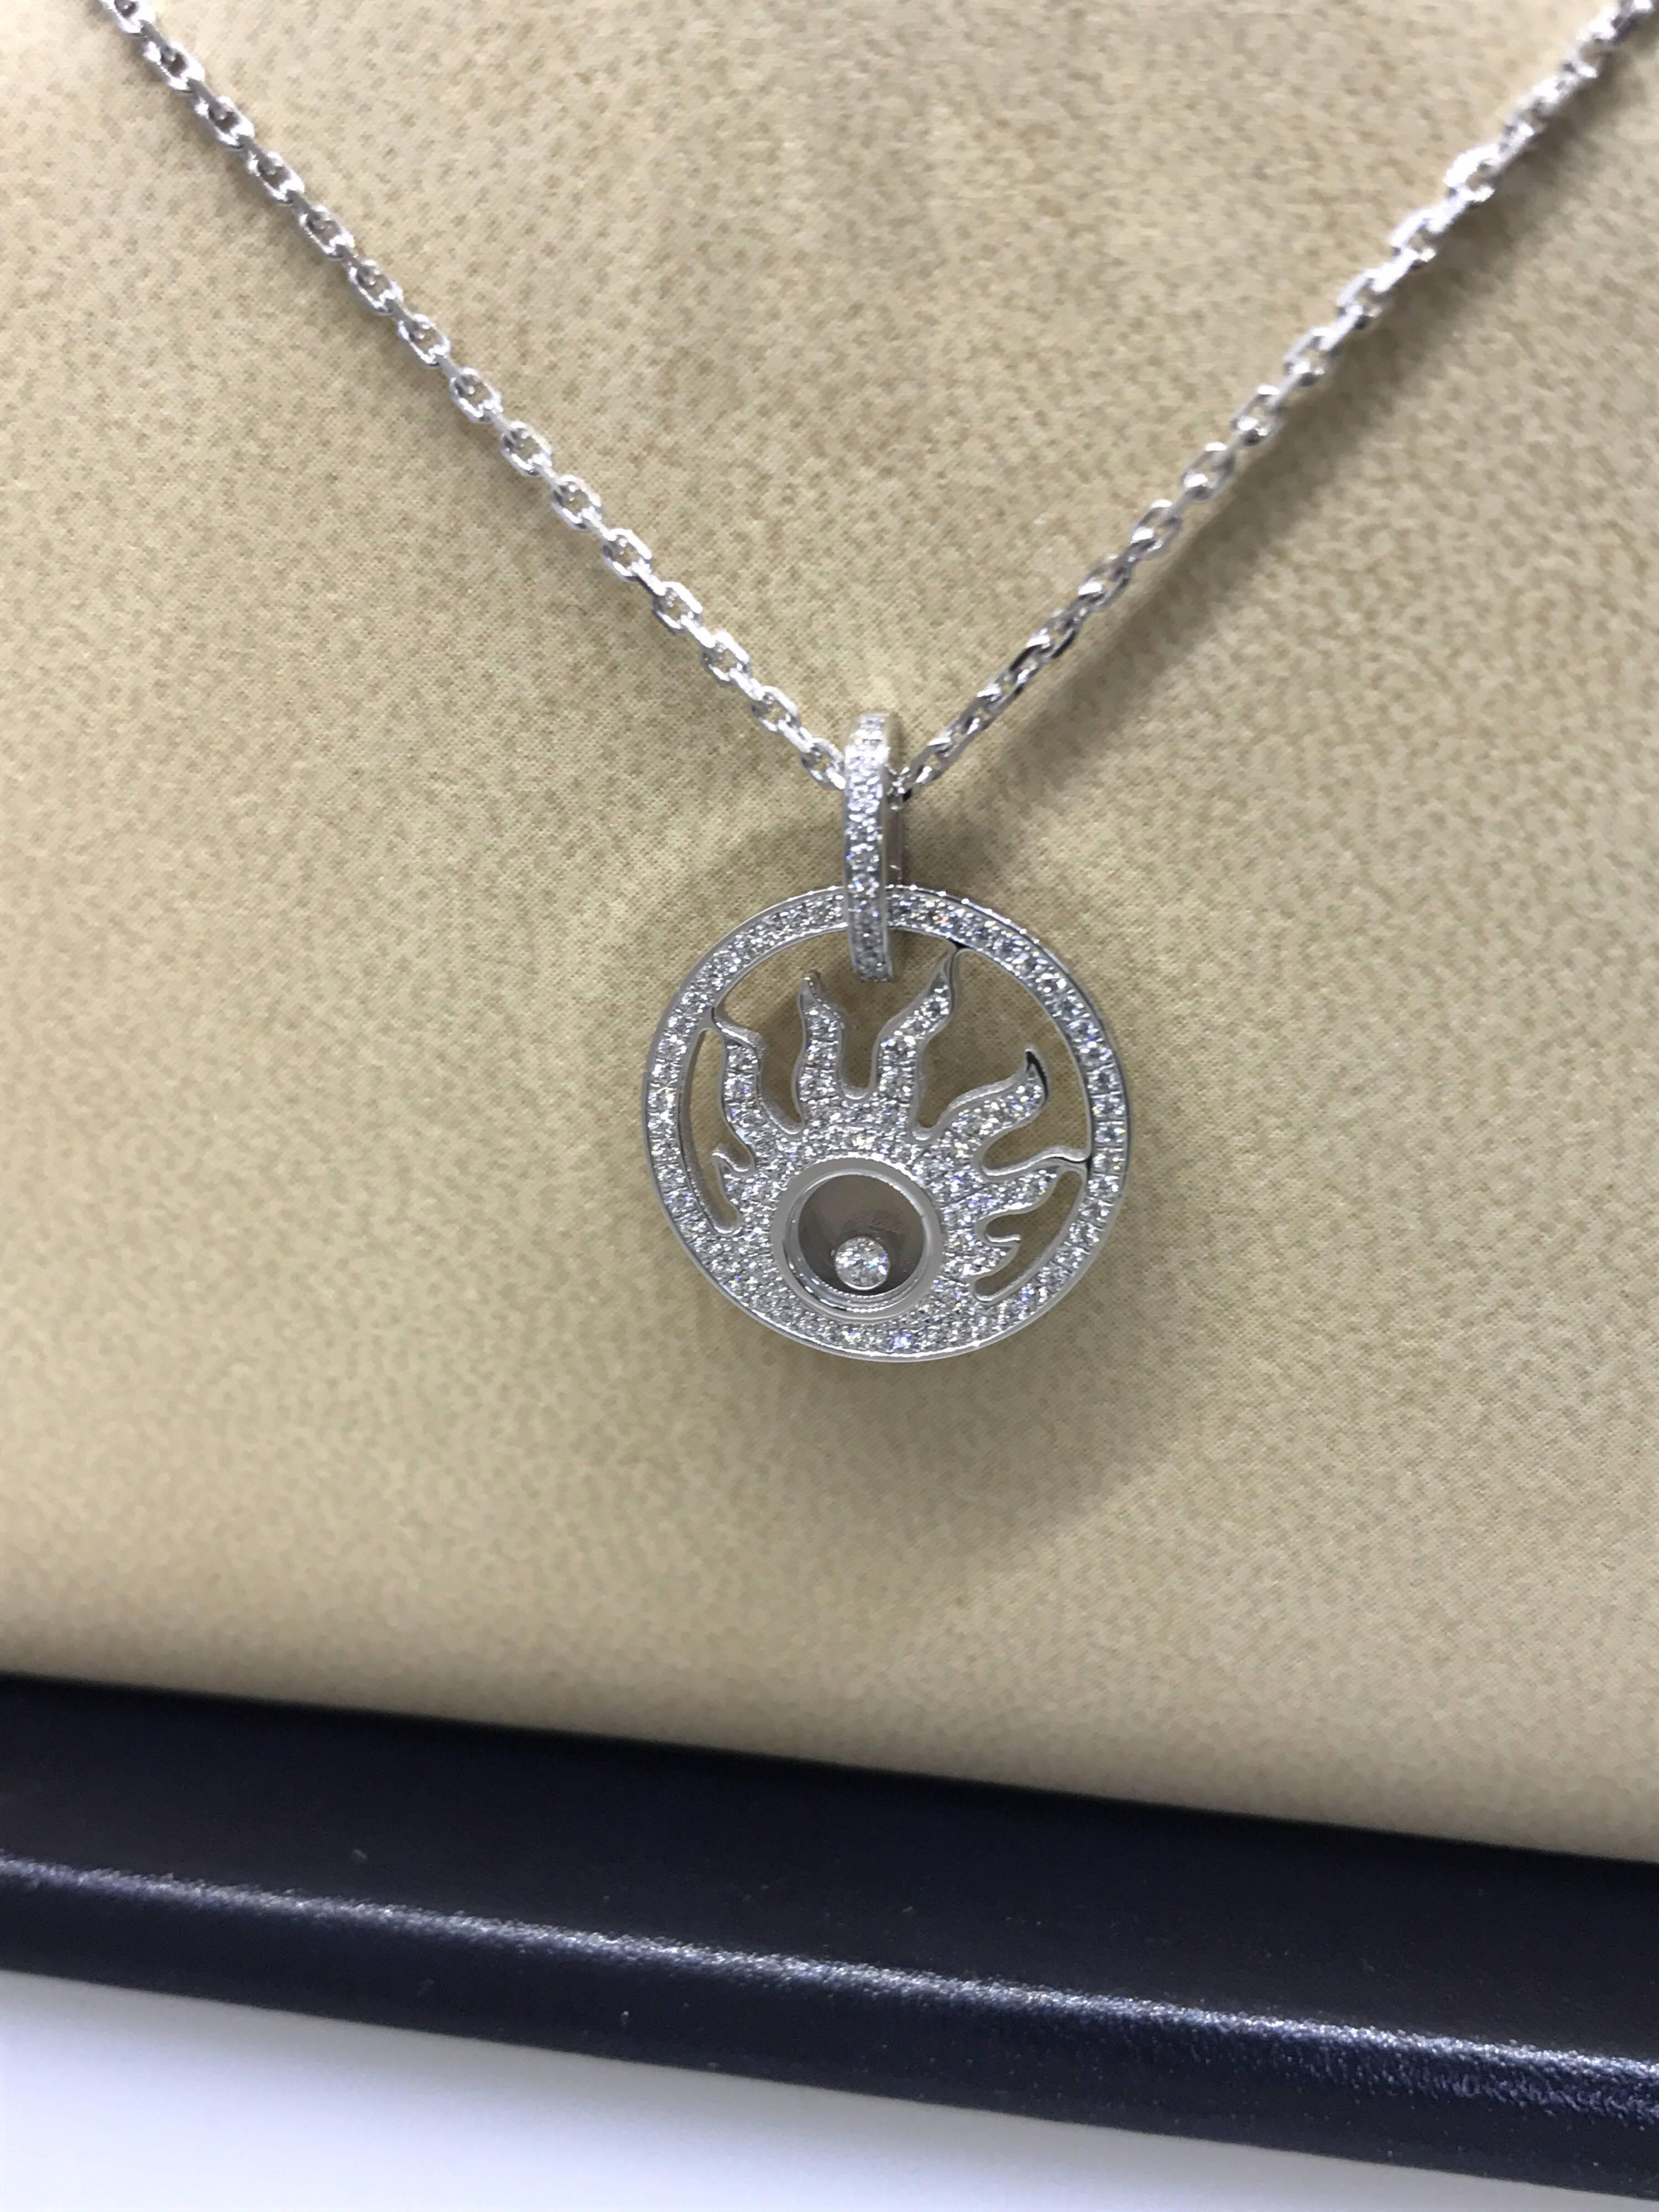 Chopard Happy Diamonds Sun Pendant / Necklace

Model Number: 79/6981-1001

100% Authentic

Brand New

Comes with original Chopard box, certificate of authenticity and warranty, and jewels manual

18 Karat White Gold (7.80gr)

107 Diamonds on the